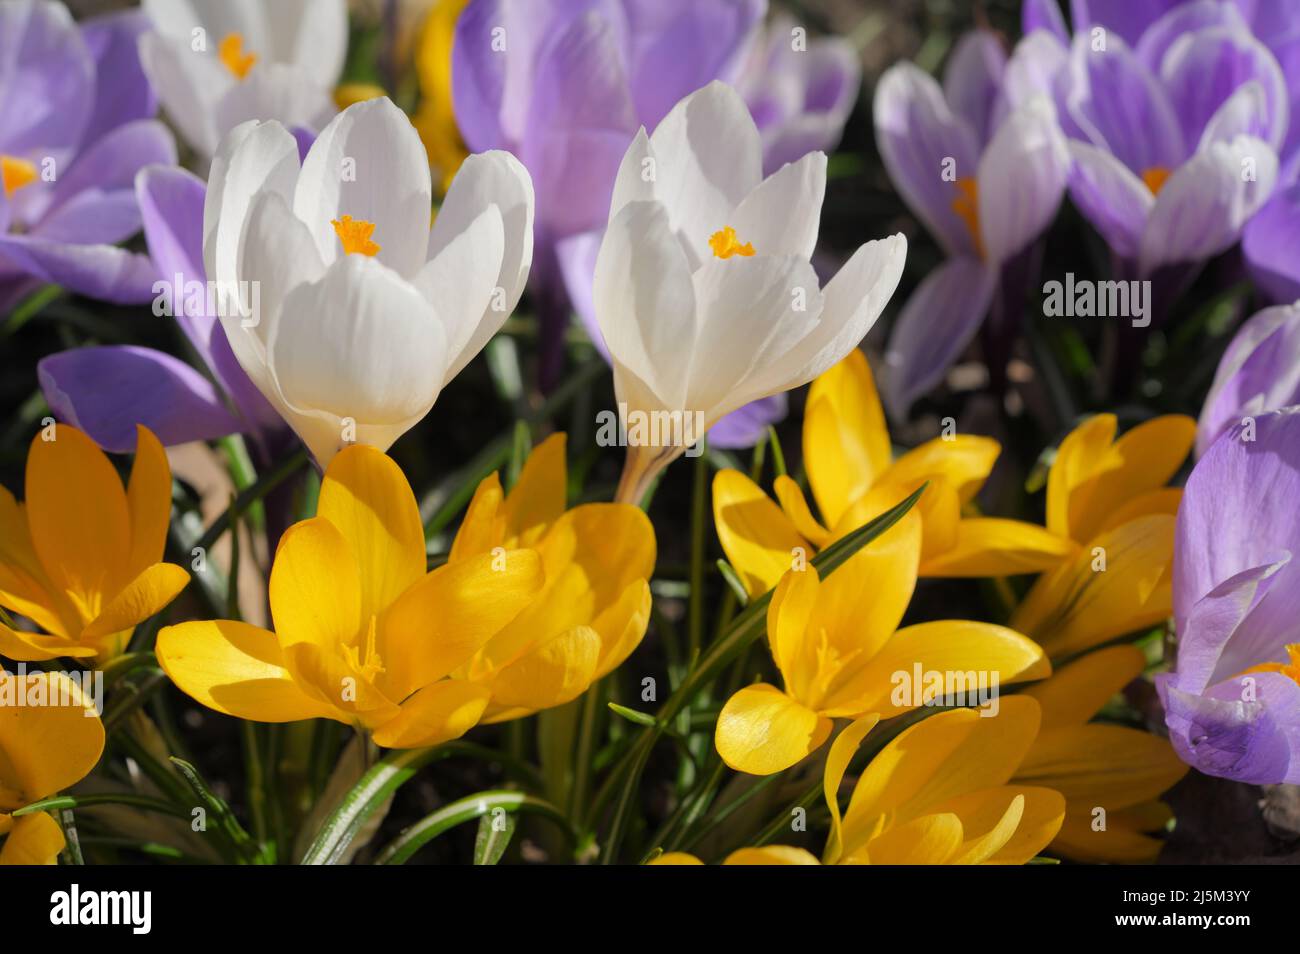 Close-up view of flowers of Crocus vernus in a garden in a sunny springtime day Stock Photo